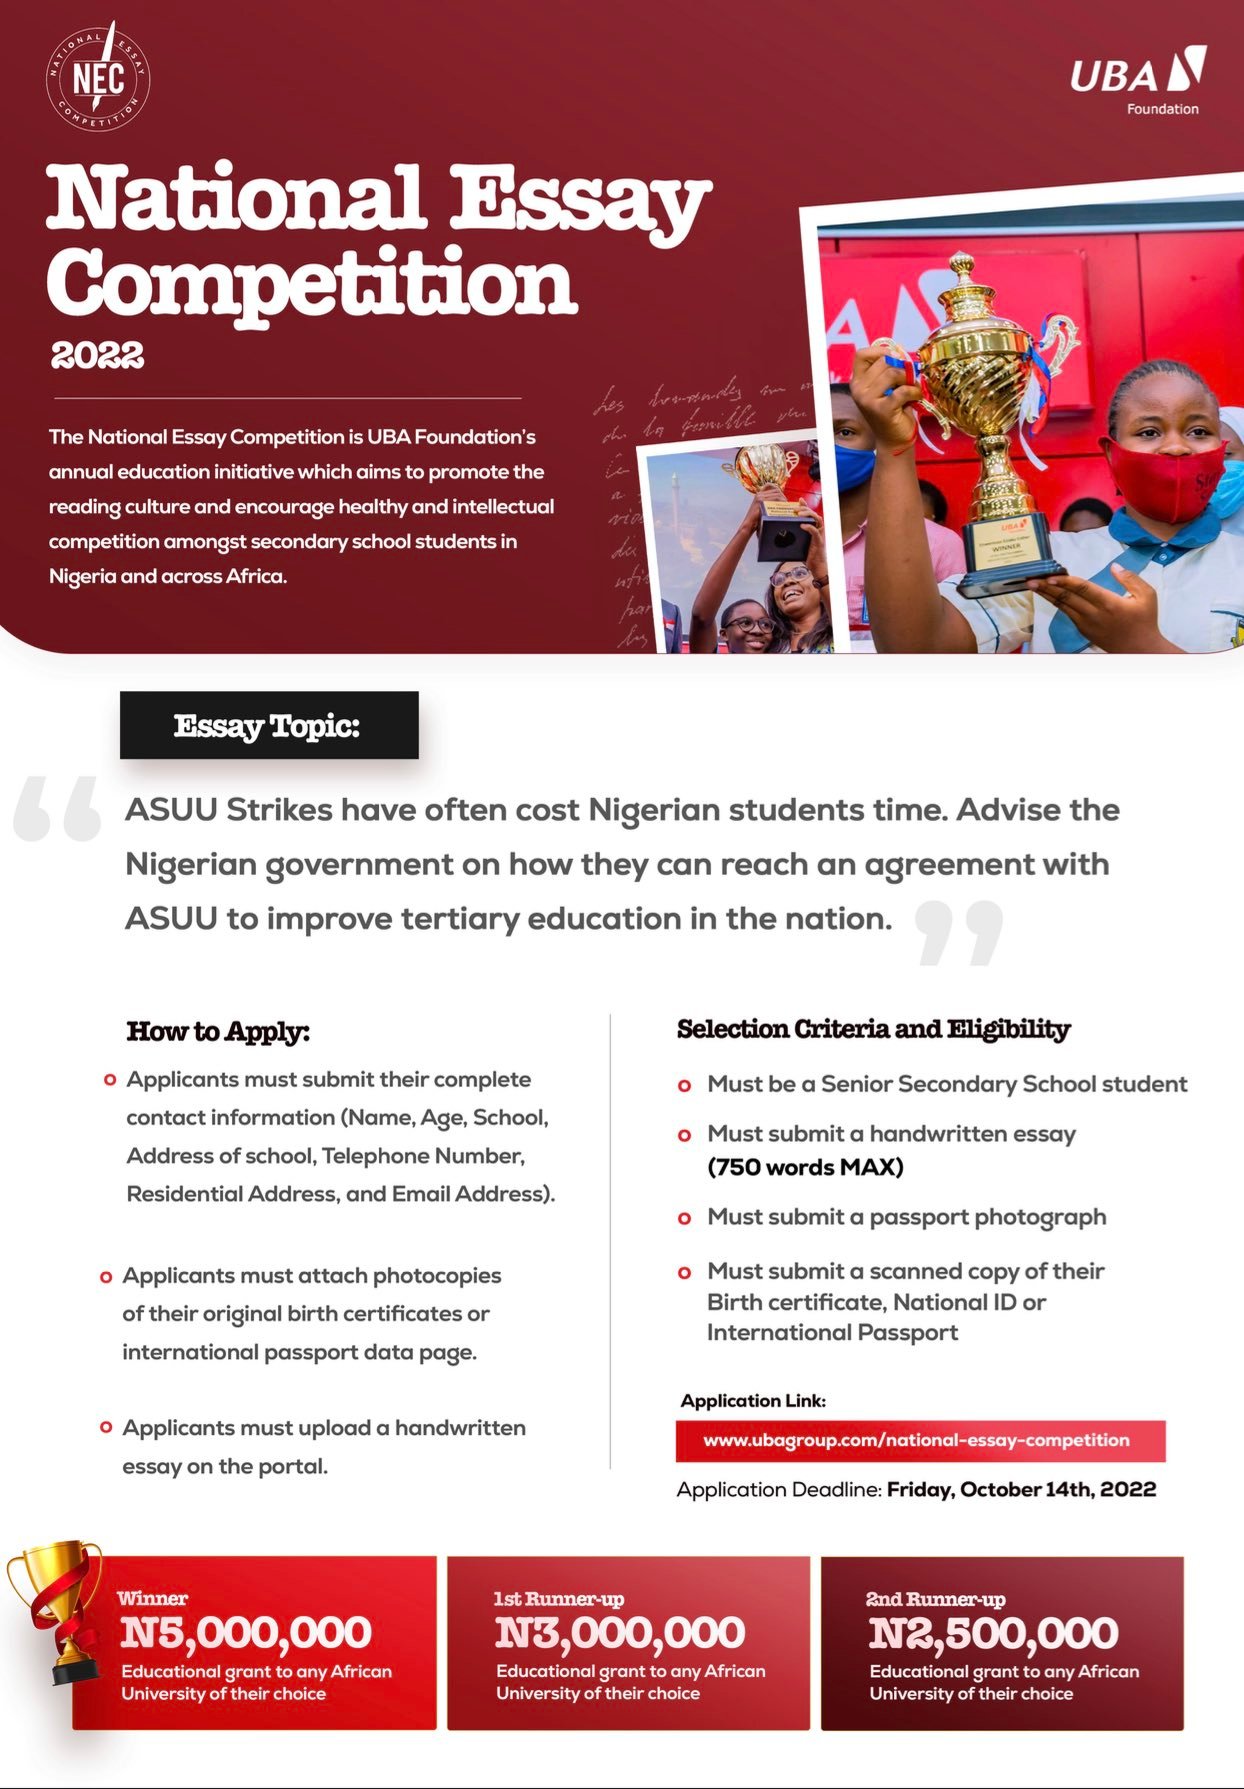 UBA Commences National Essay Competition 2022 For College Students, Apply Before Oct 14